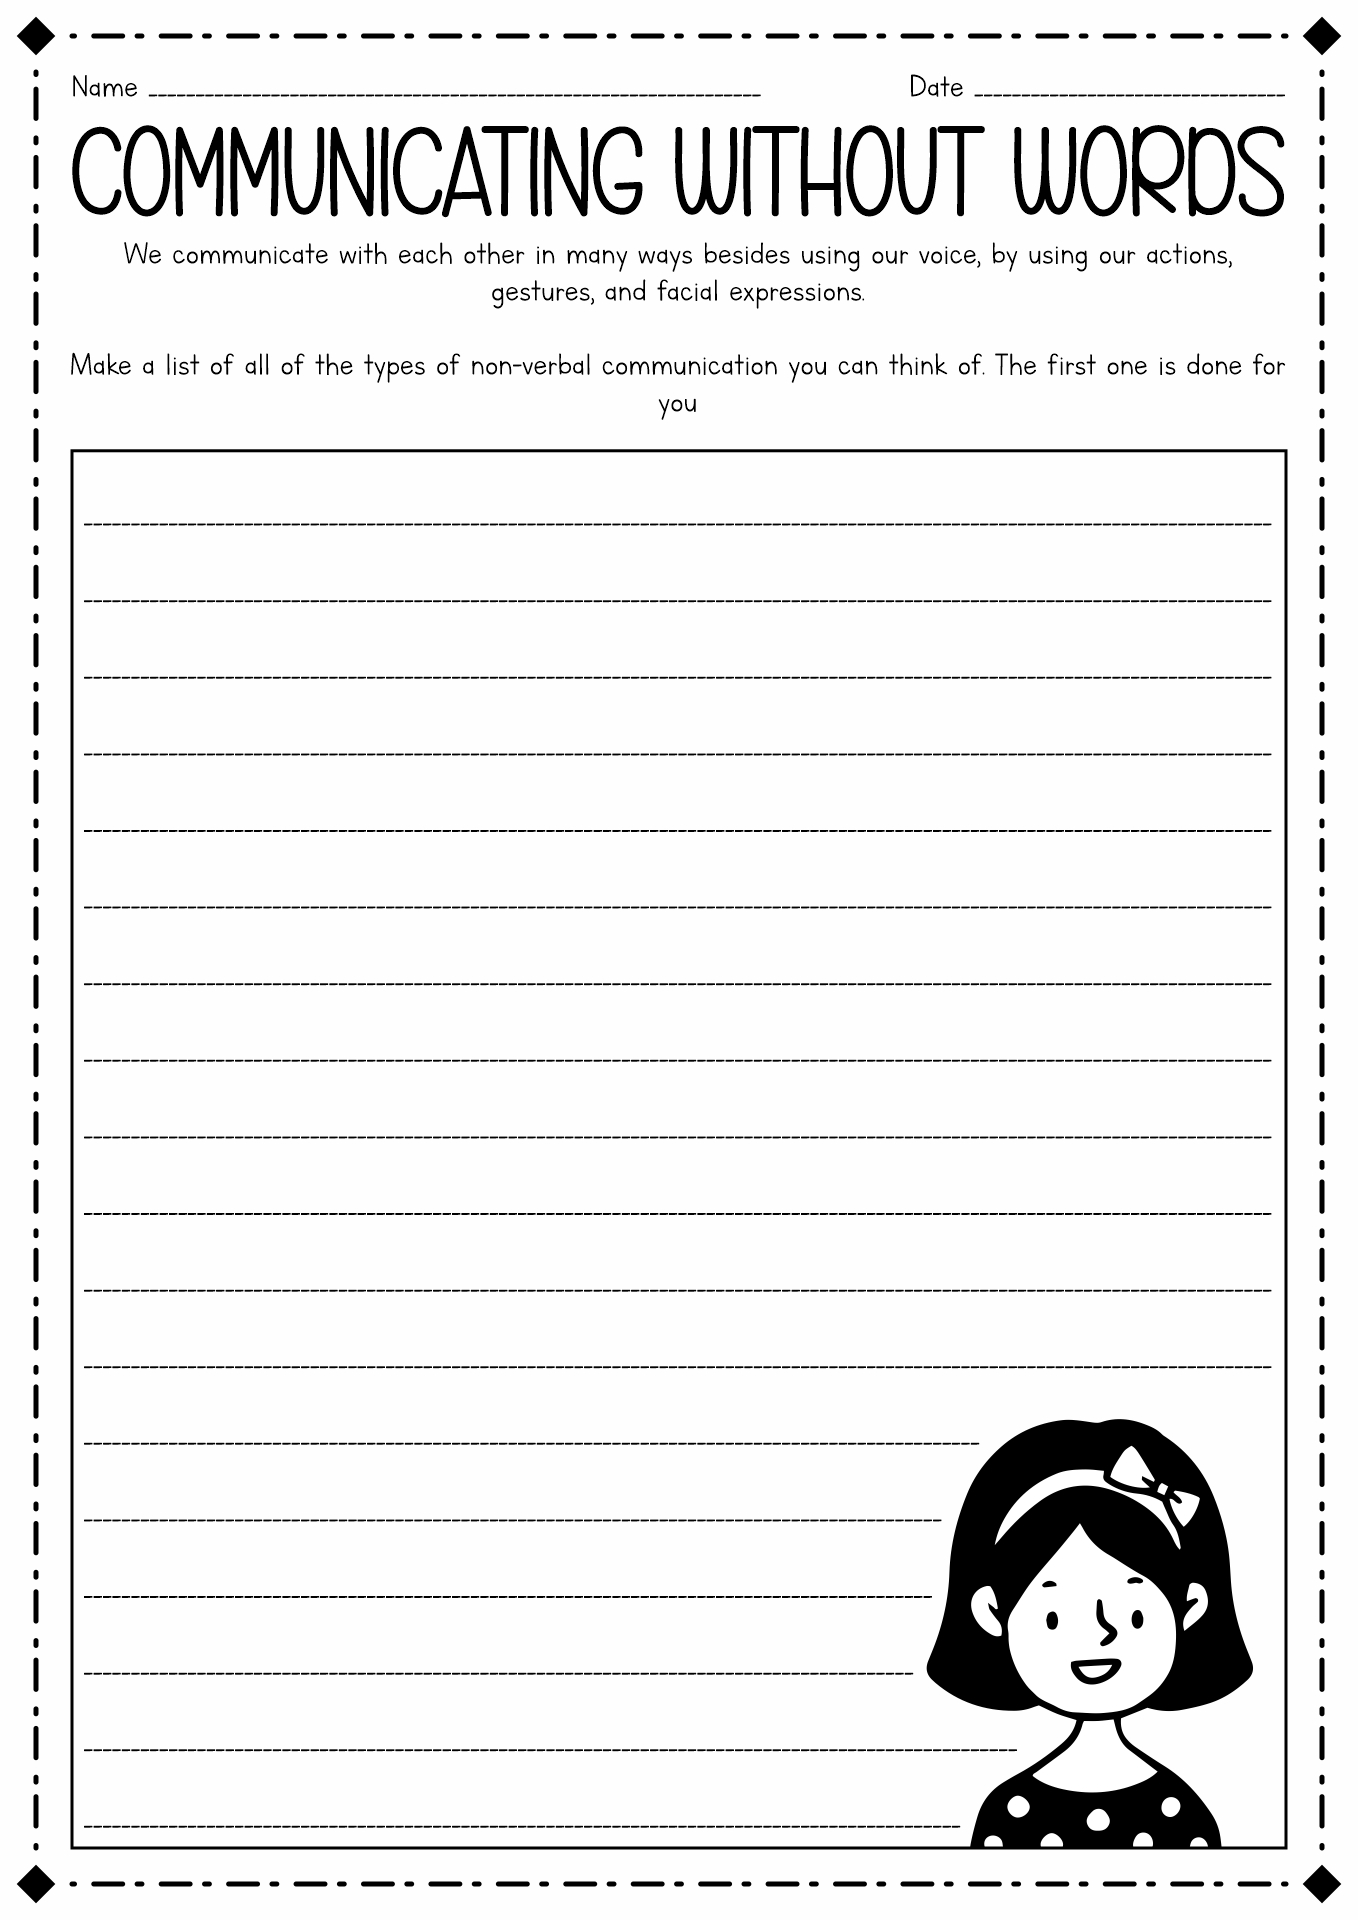 17-best-images-of-free-communication-worksheets-2nd-grade-vocabulary